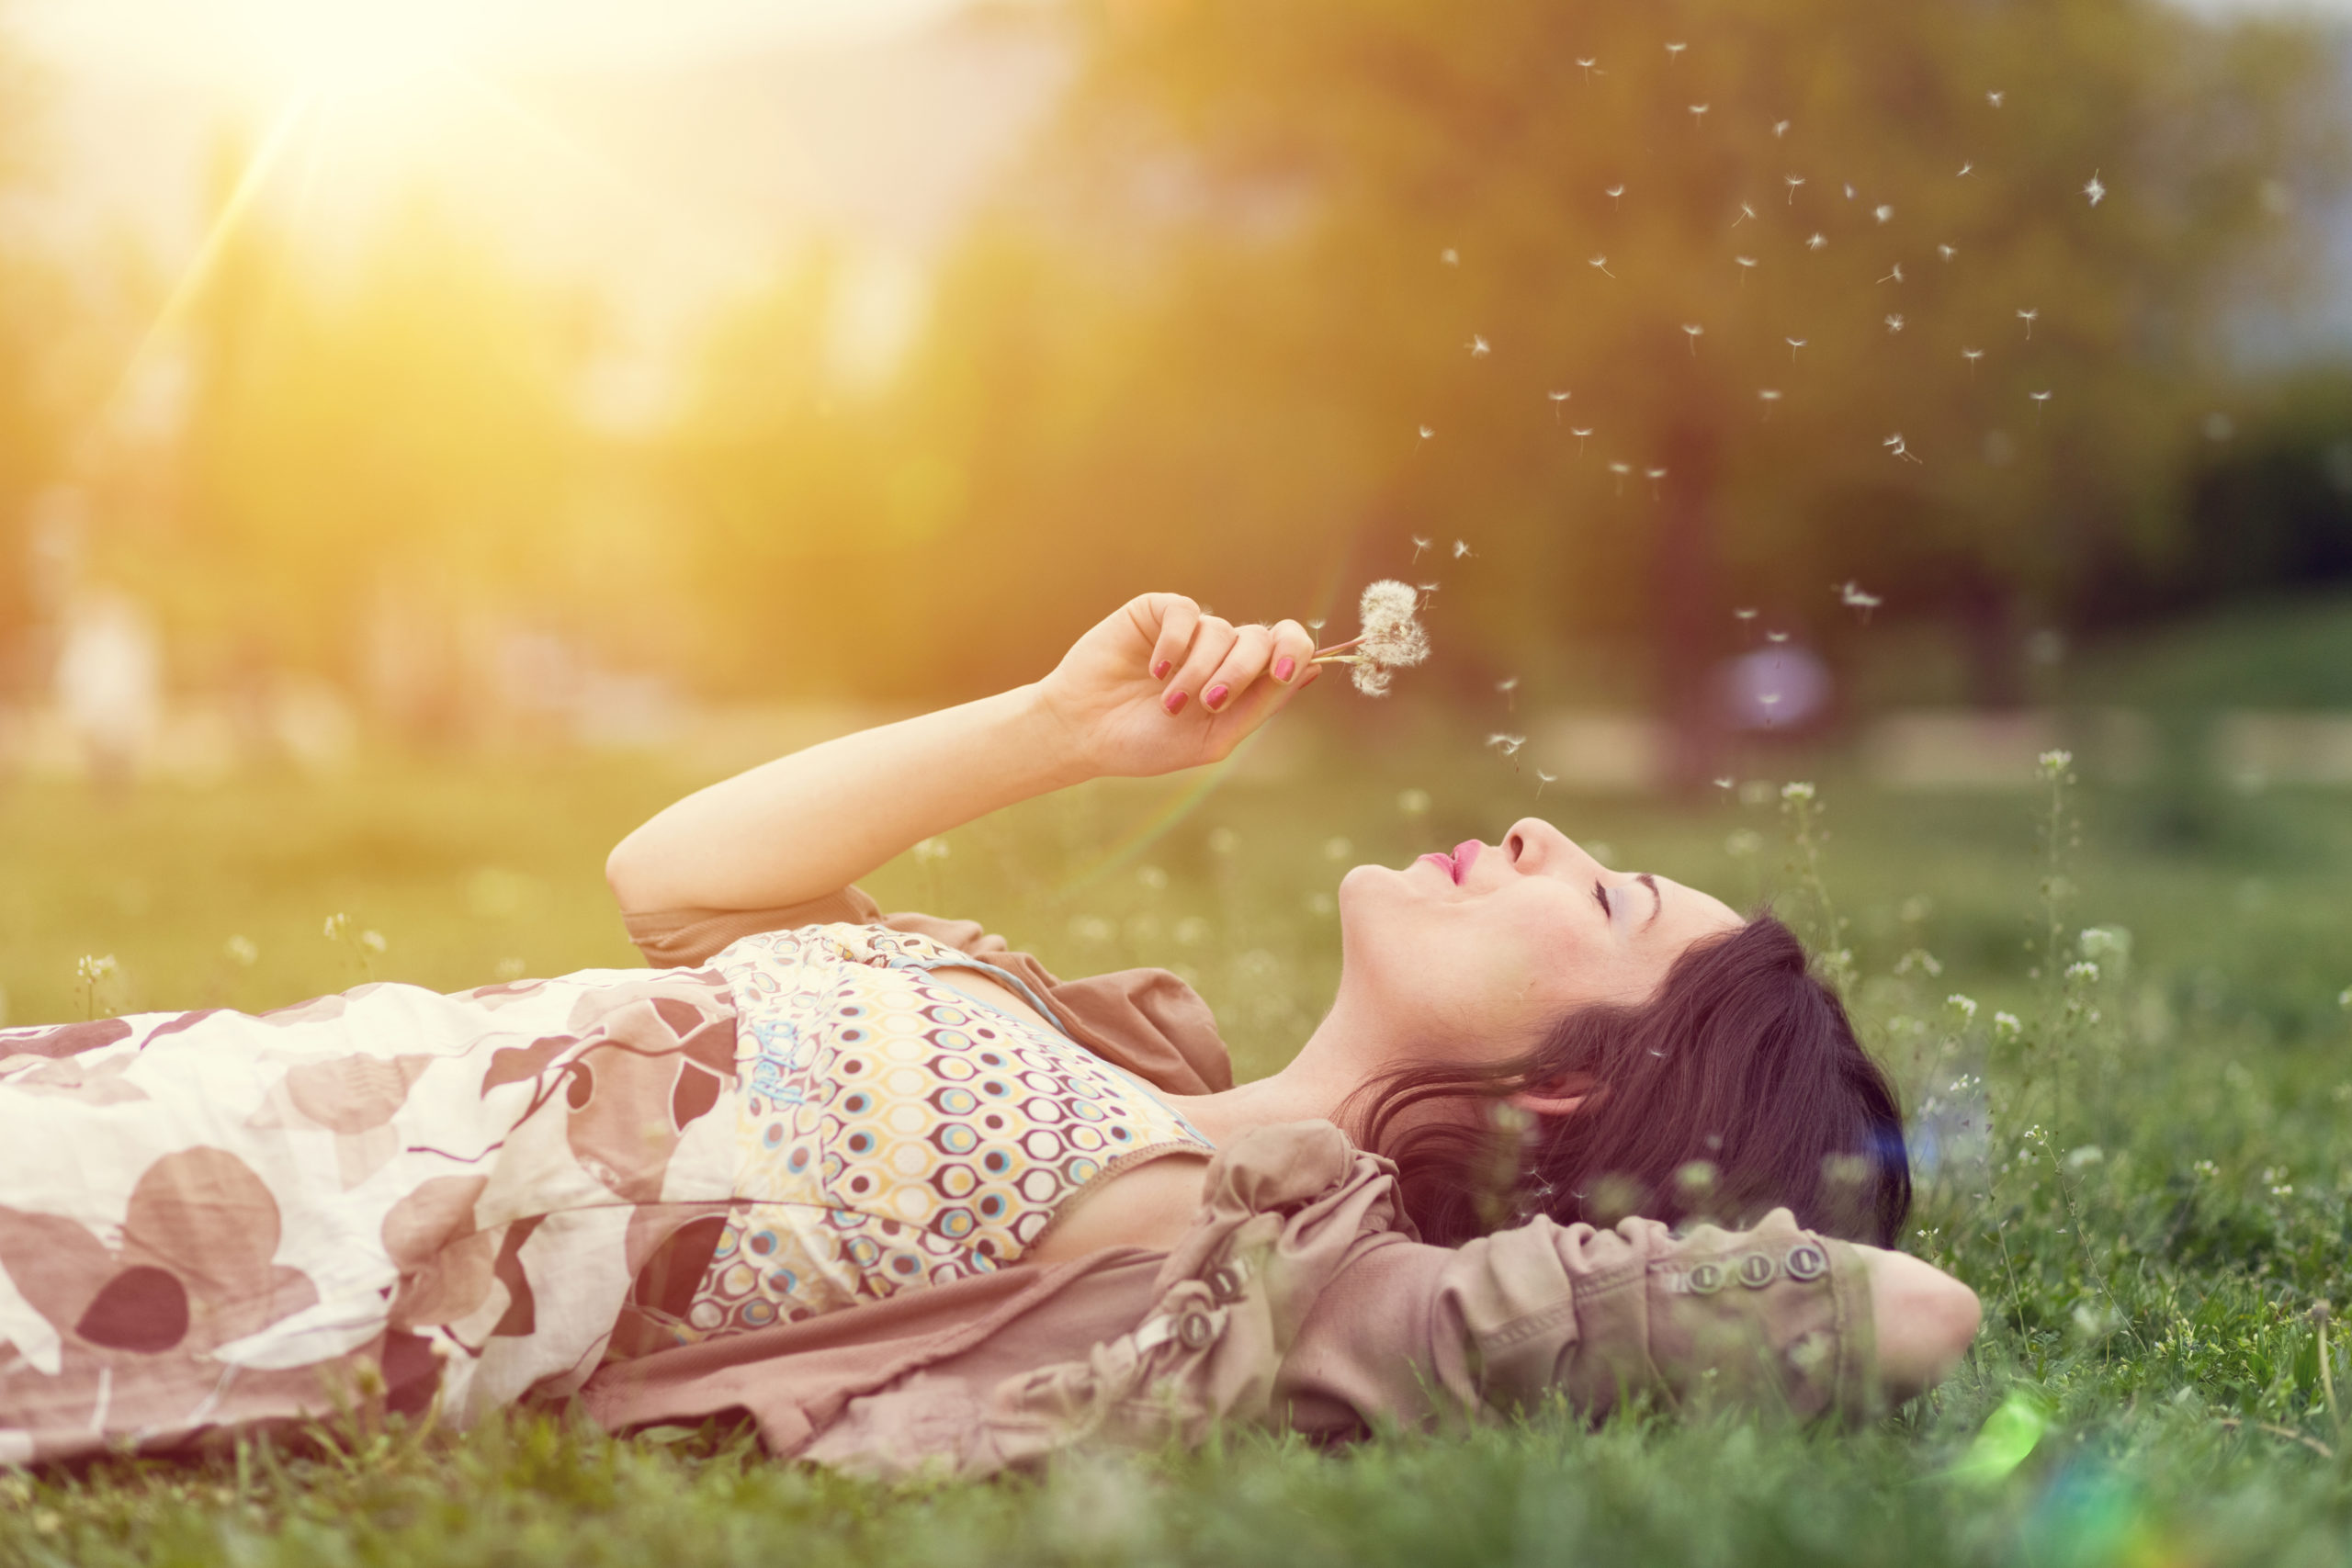 Image shows woman lying on the grass blowing on a dandelion